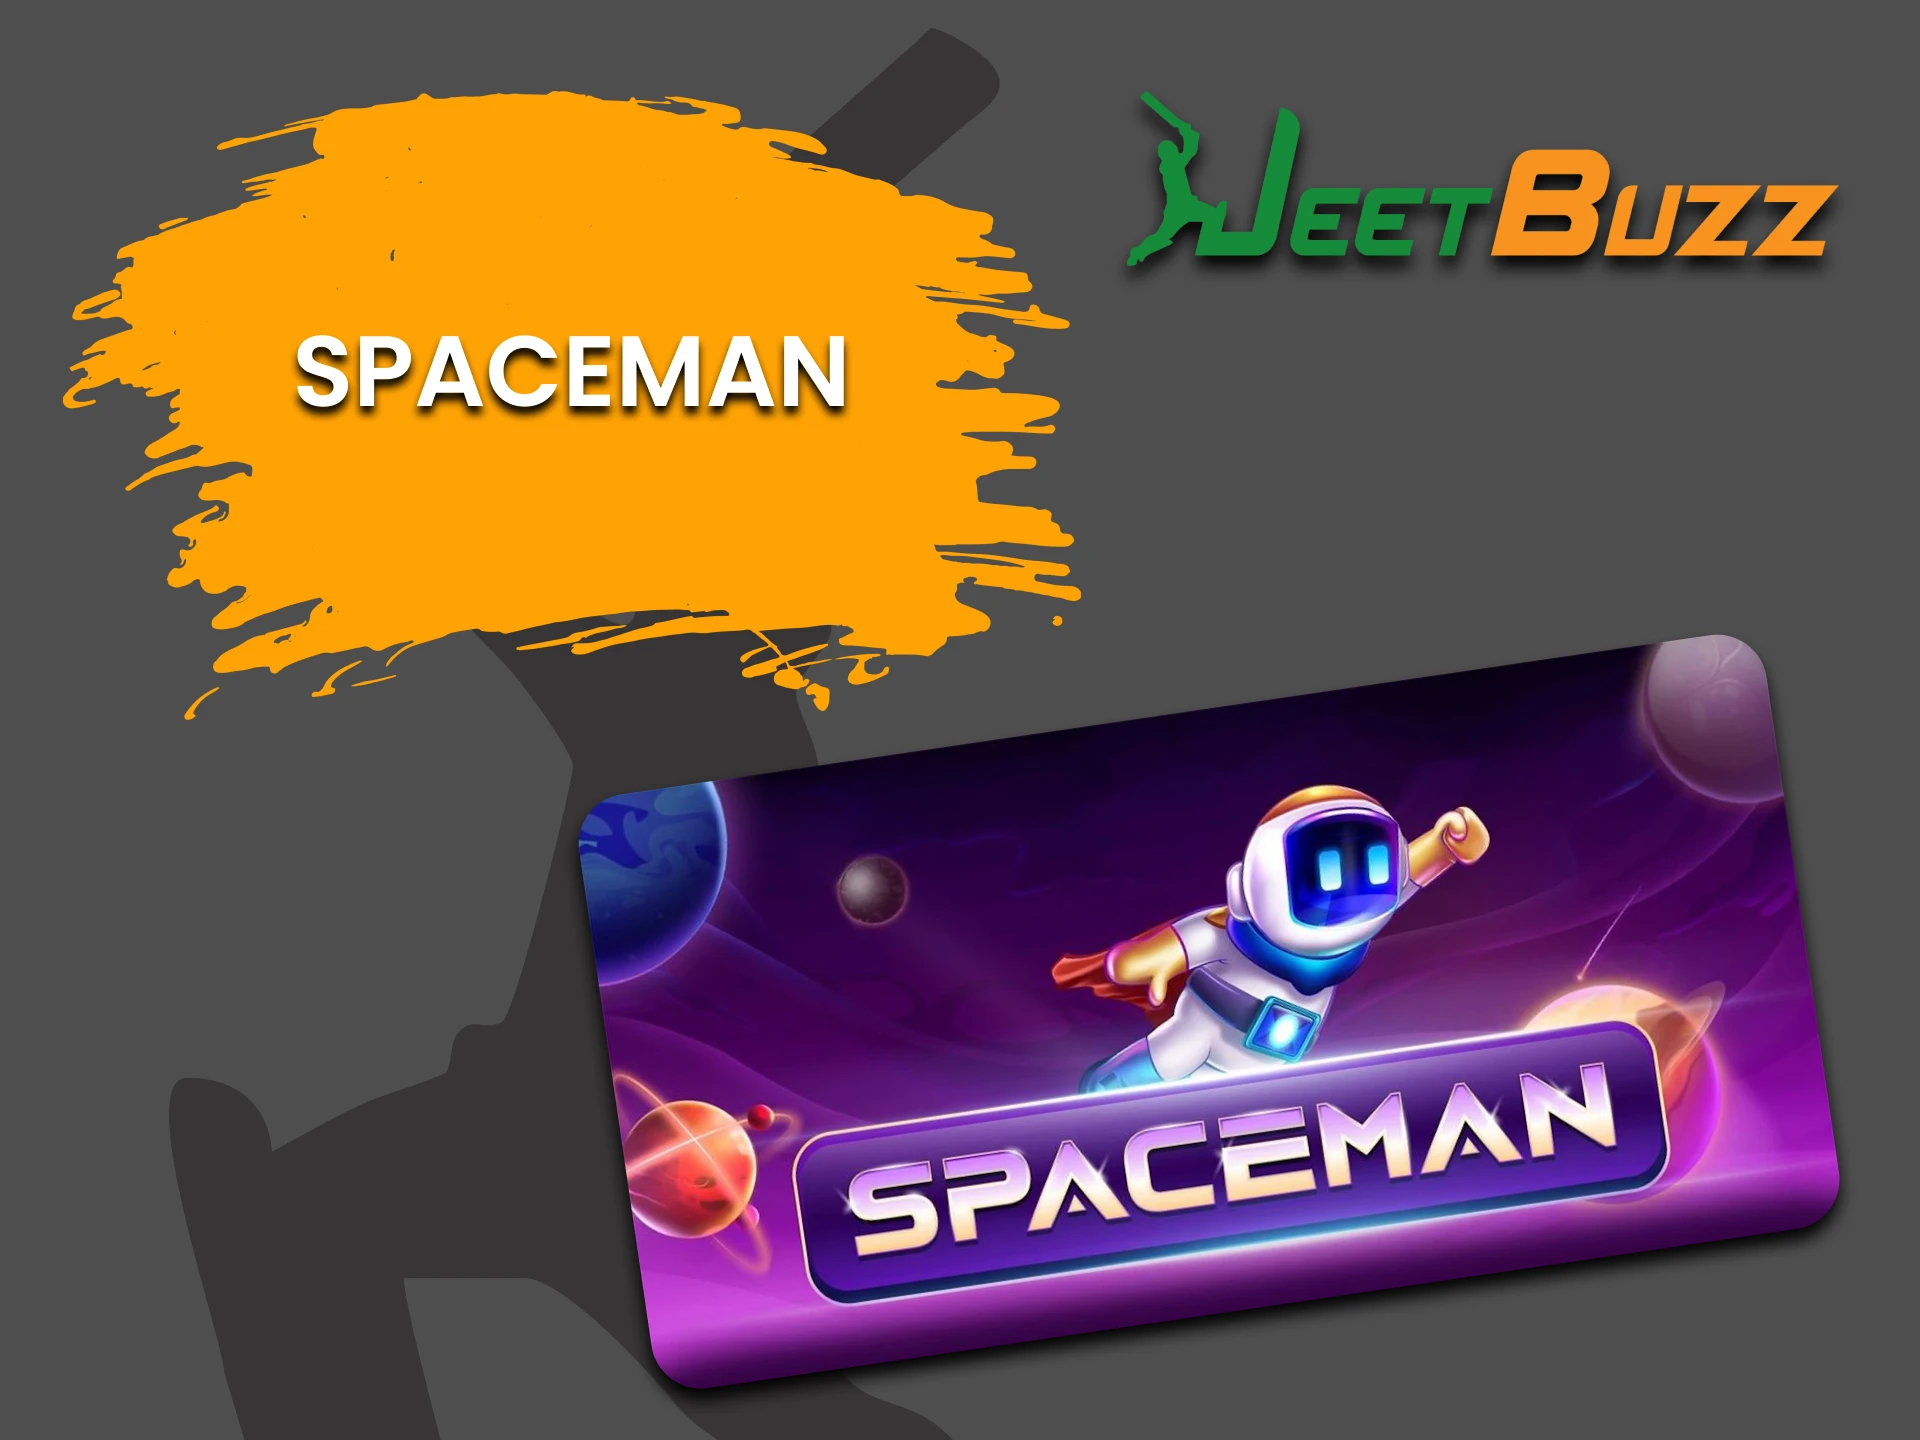 After selecting the Arcade section of JeetBuzz, try playing Spaceman.